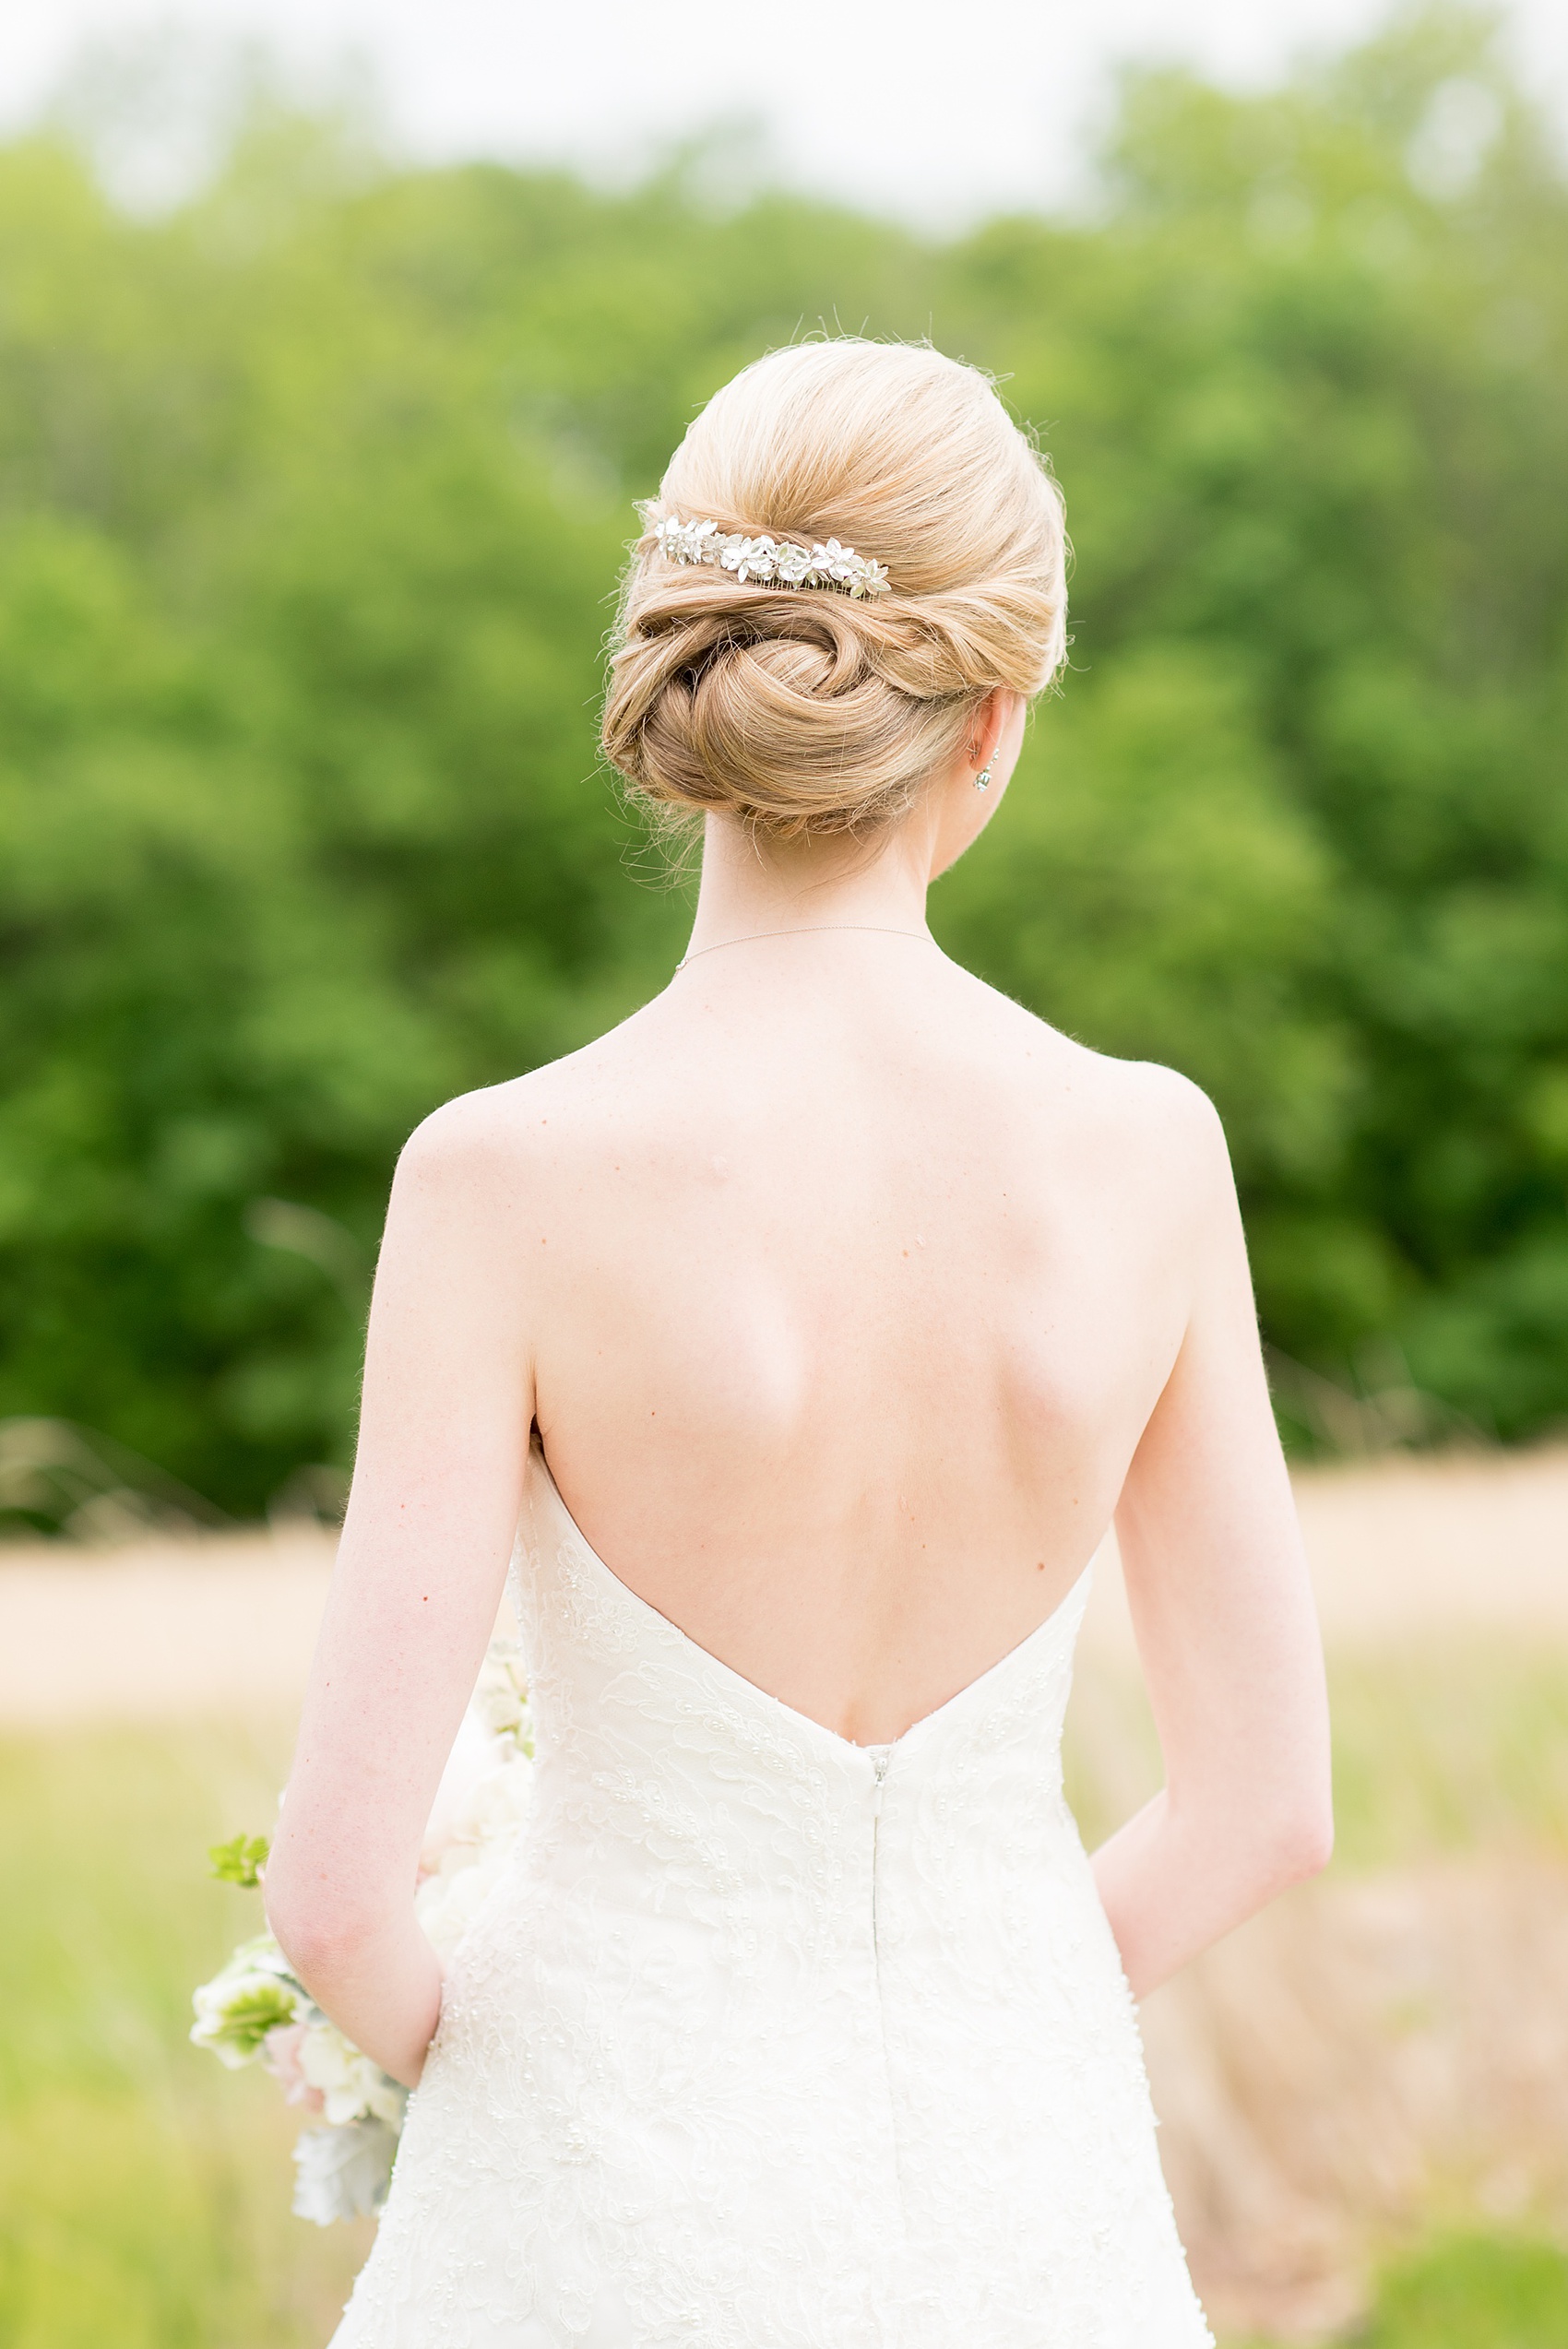 Waveny House wedding photos in Connecticut by Mikkel Paige Photography. Picture of the bride's hair, all up with a decorative rhinestone comb.